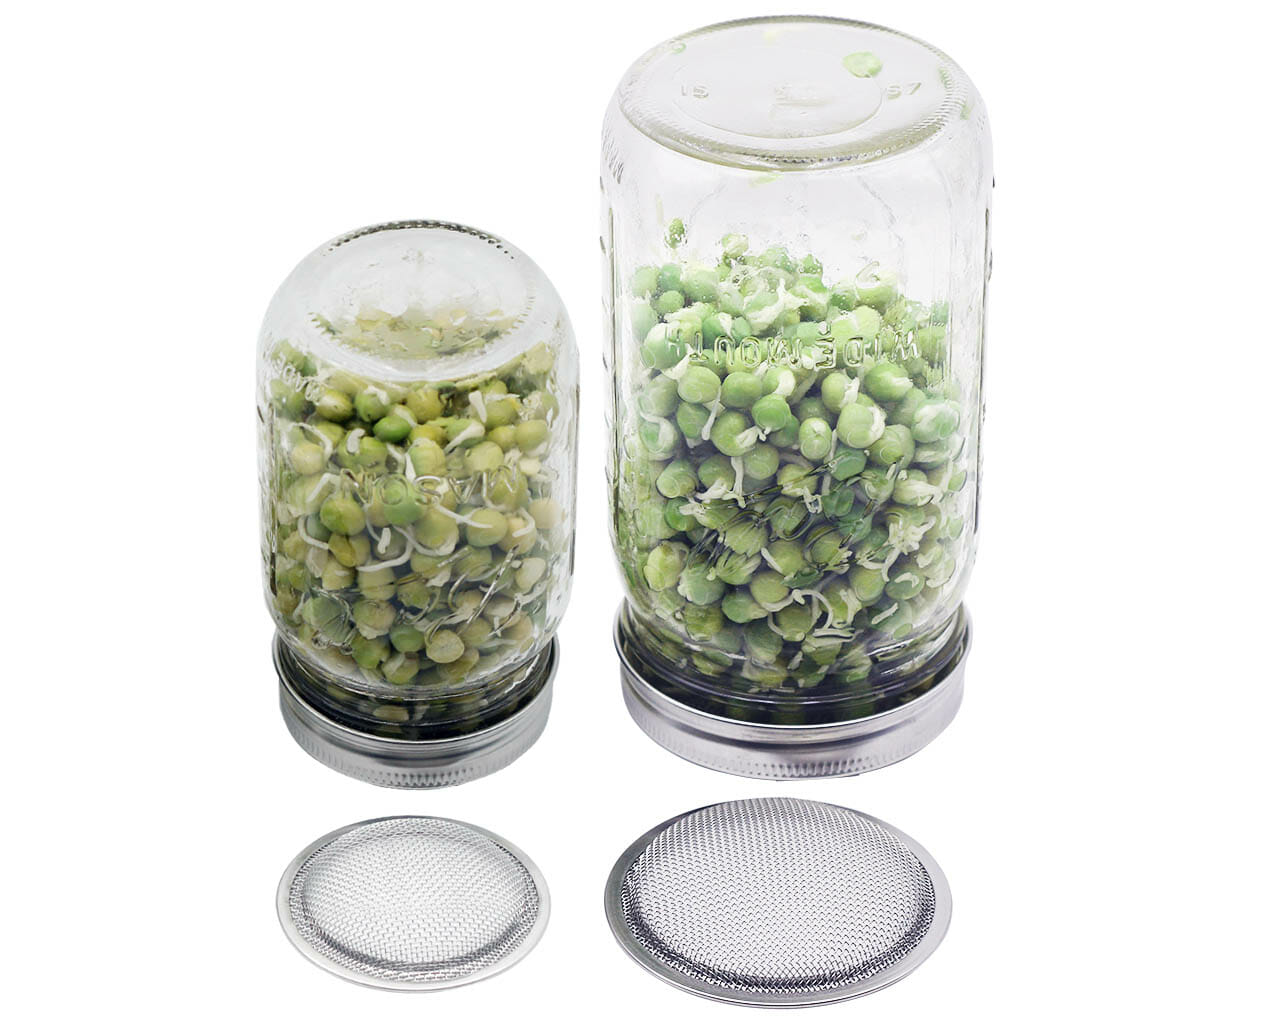 mason-jar-lifestyle-stainless-steel-mesh-sprouting-lid-band-wide-regular-mouth-ball-16oz-pint-32oz-quart-beans-peas-front